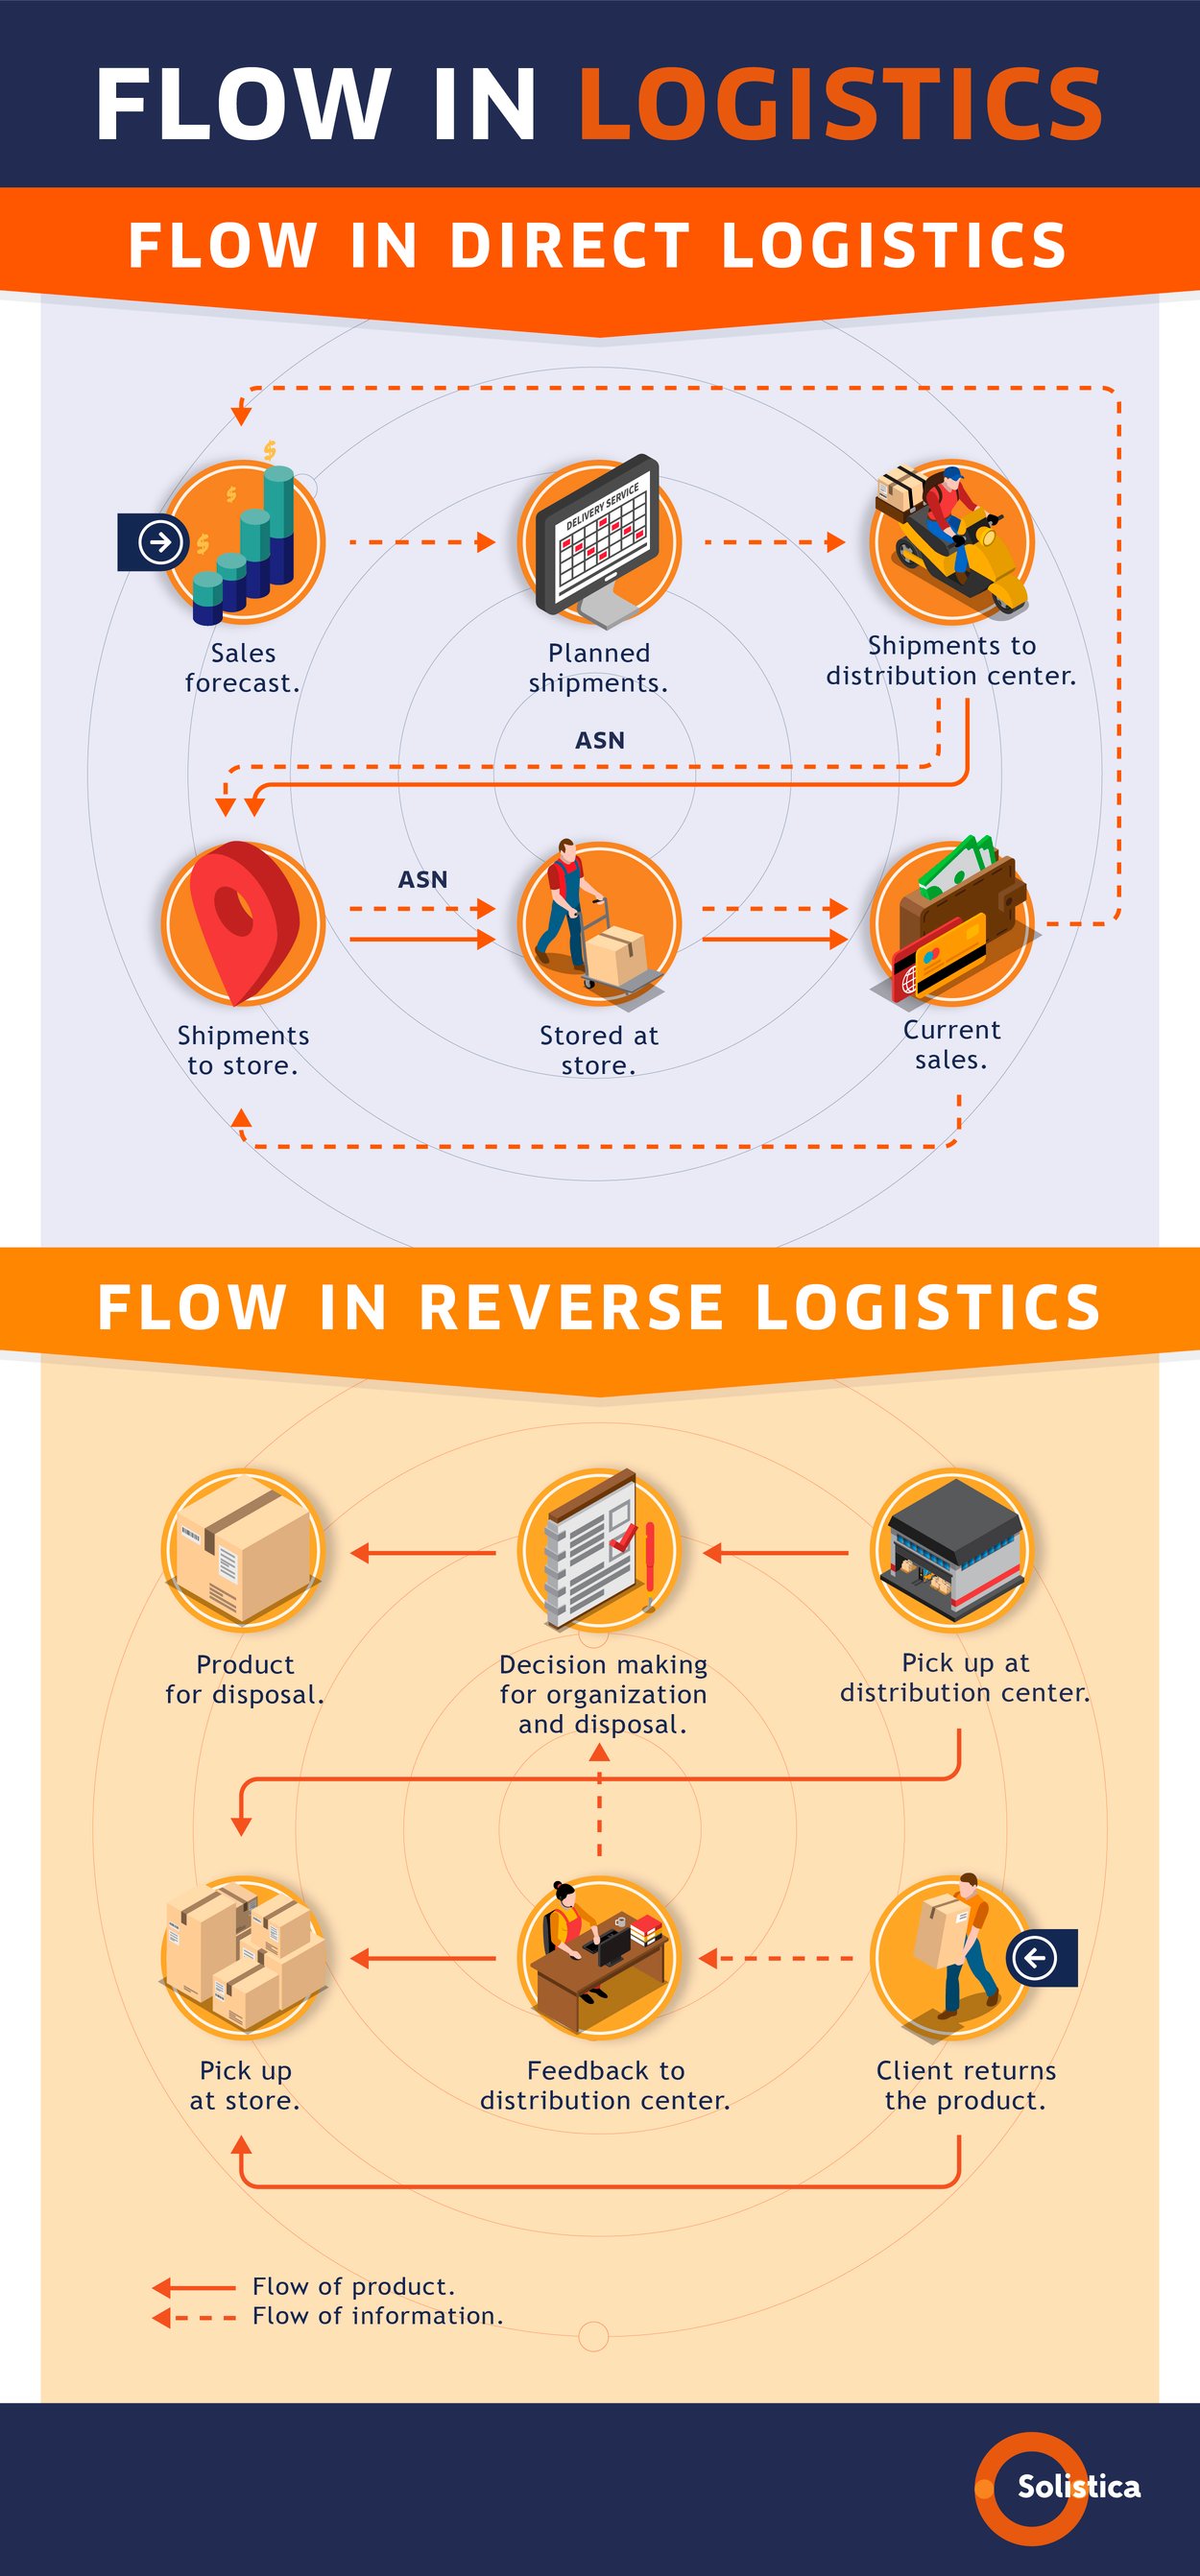 Reverse logistics and its importance for manufacturers and retailers